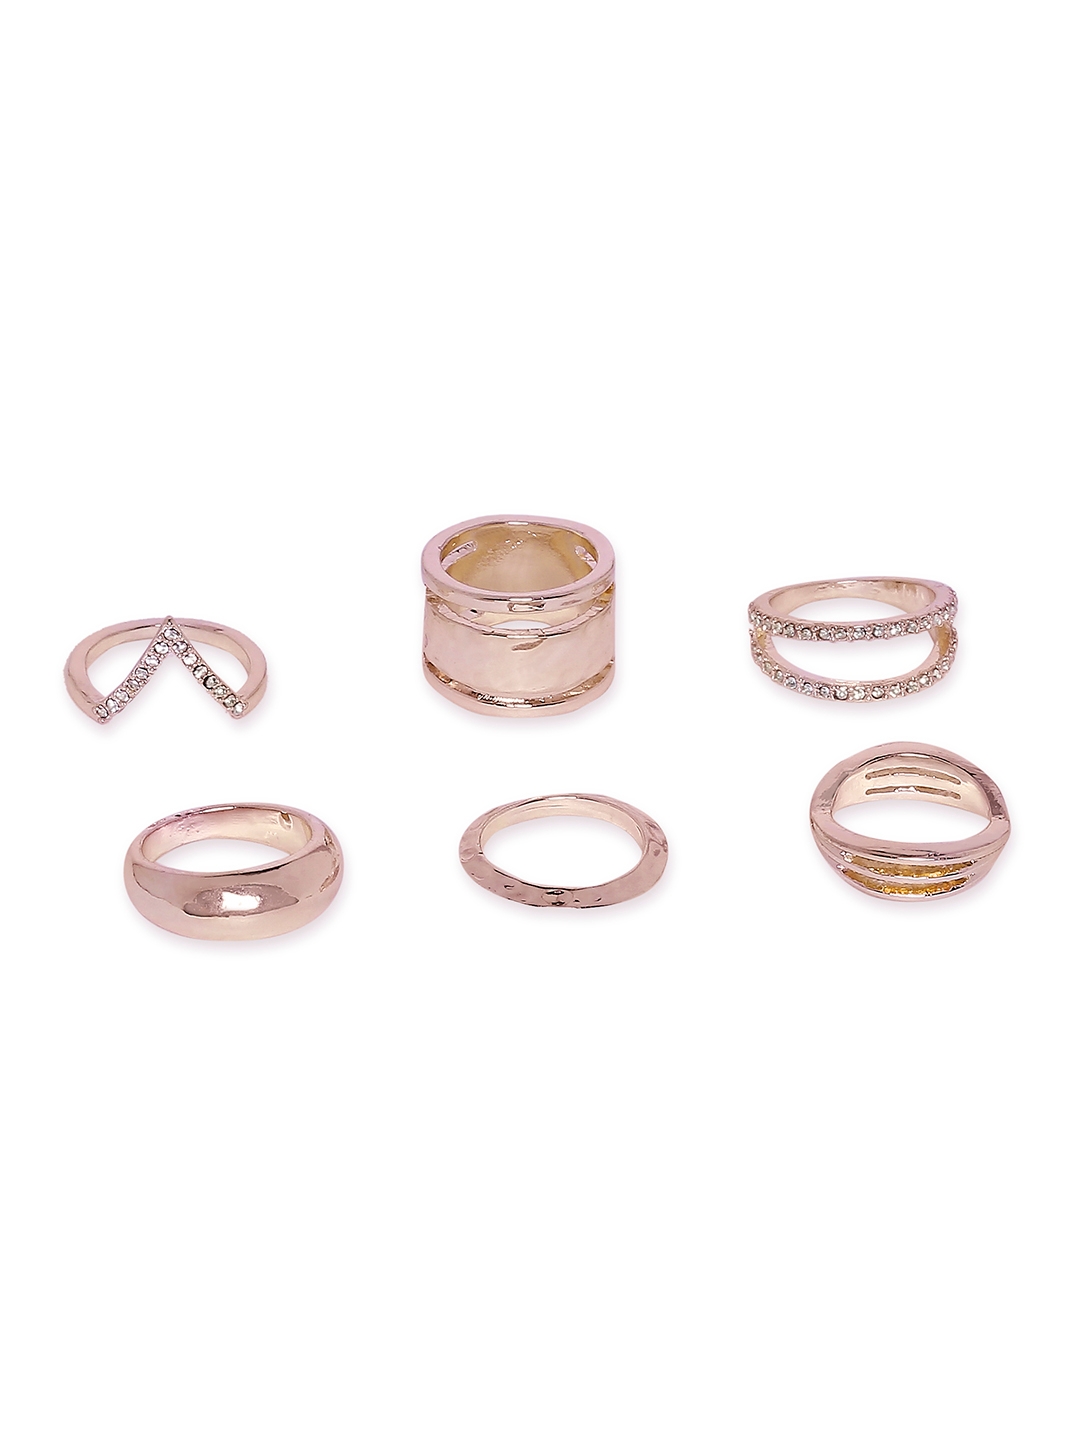 Lilly & sparkle | Lilly & Sparkle Combo Pack Of Set Of 6 Rose Gold Rings And Gold Toned Crystal Studded Hoop Earrings 3